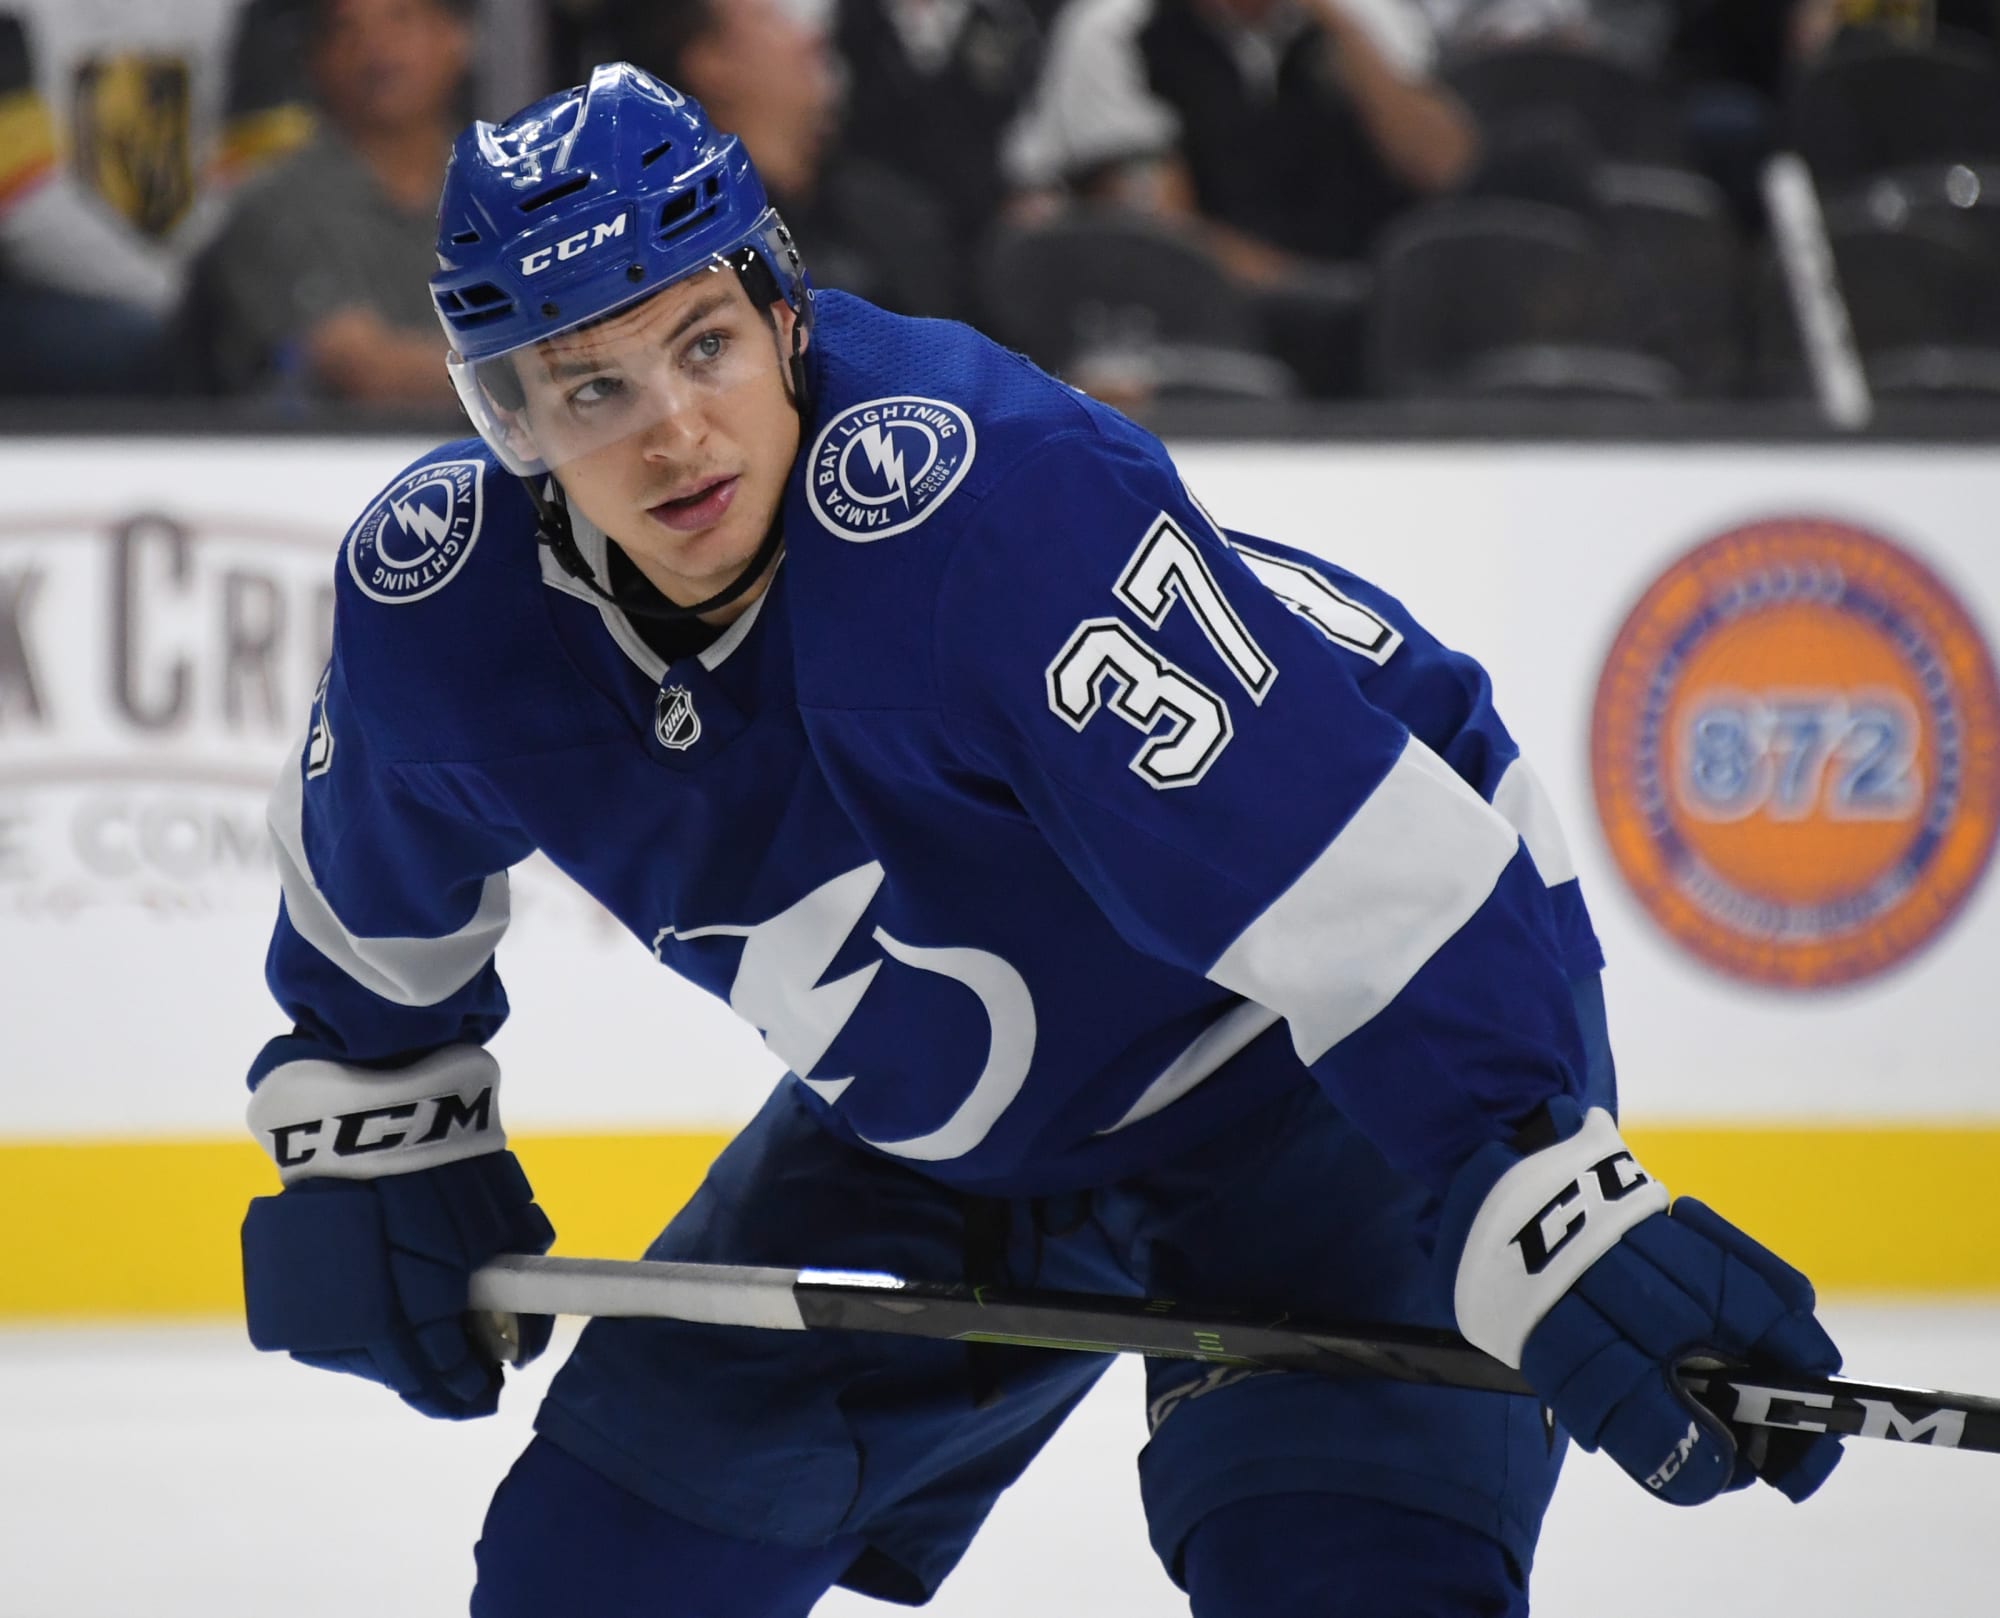 Yanni Gourde had the GWG for Tampa and the Lightning have advanced